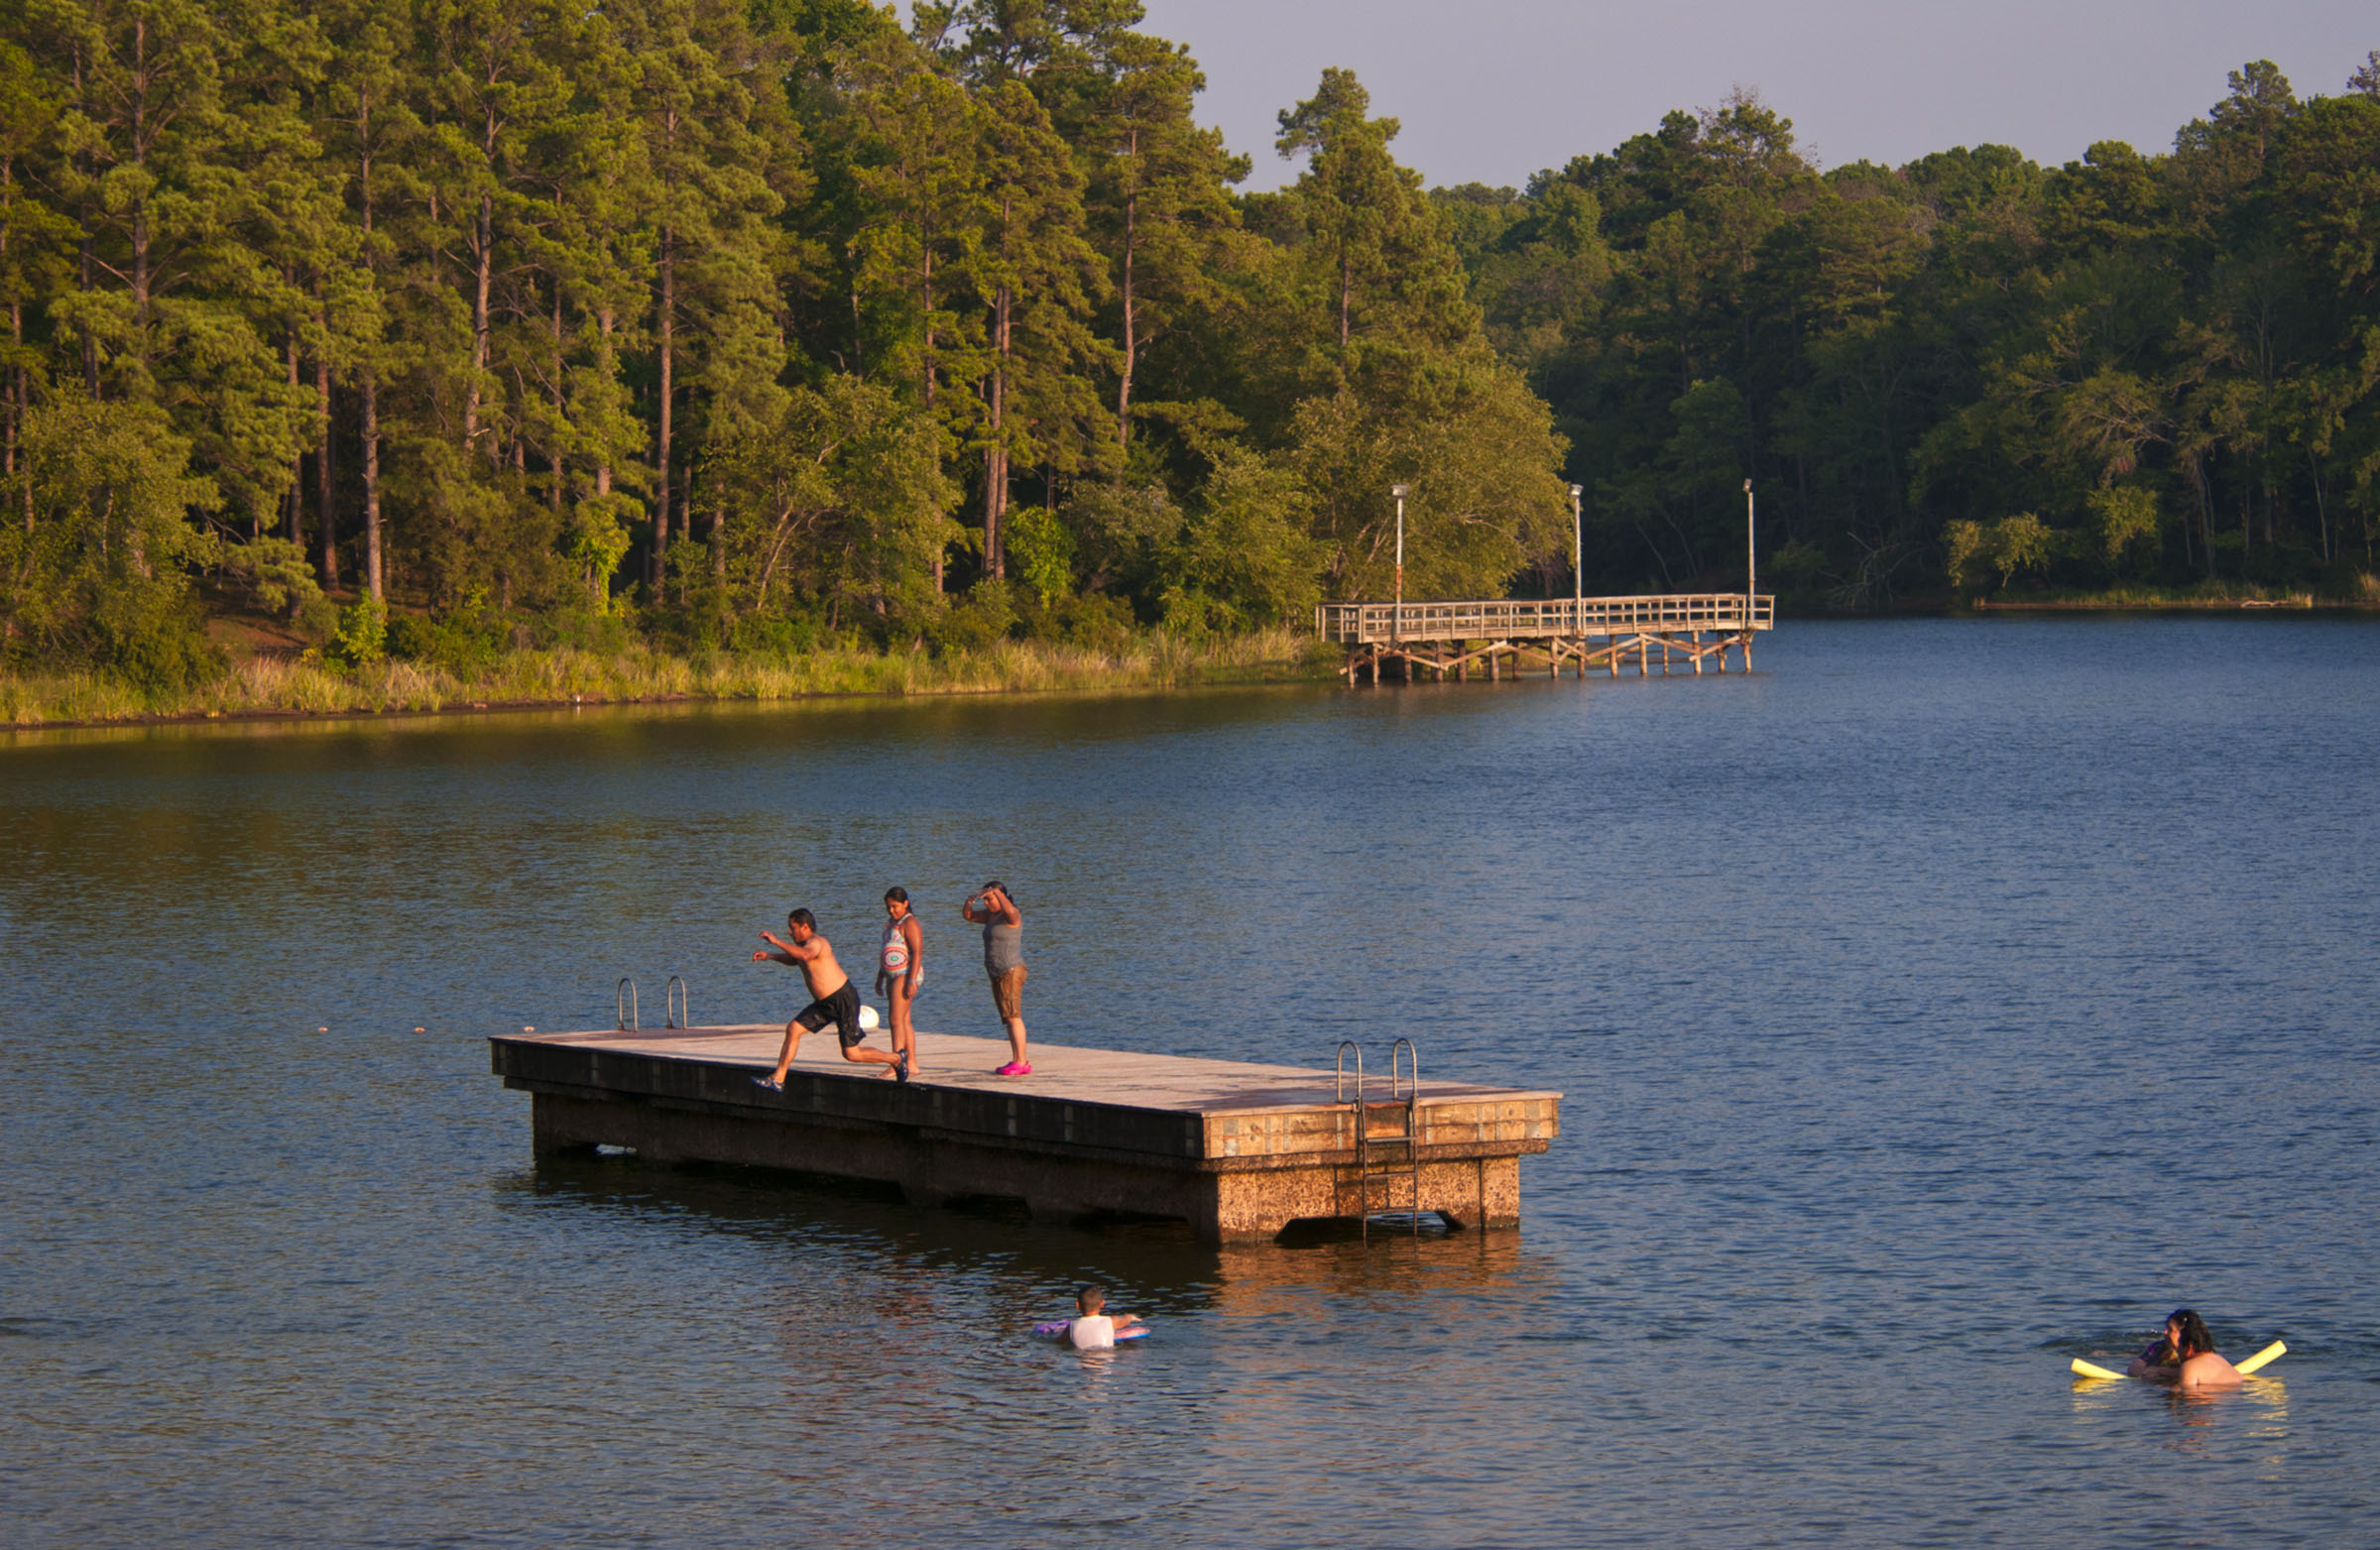 A small group of people swim off of a dock in a lake with large pine trees around